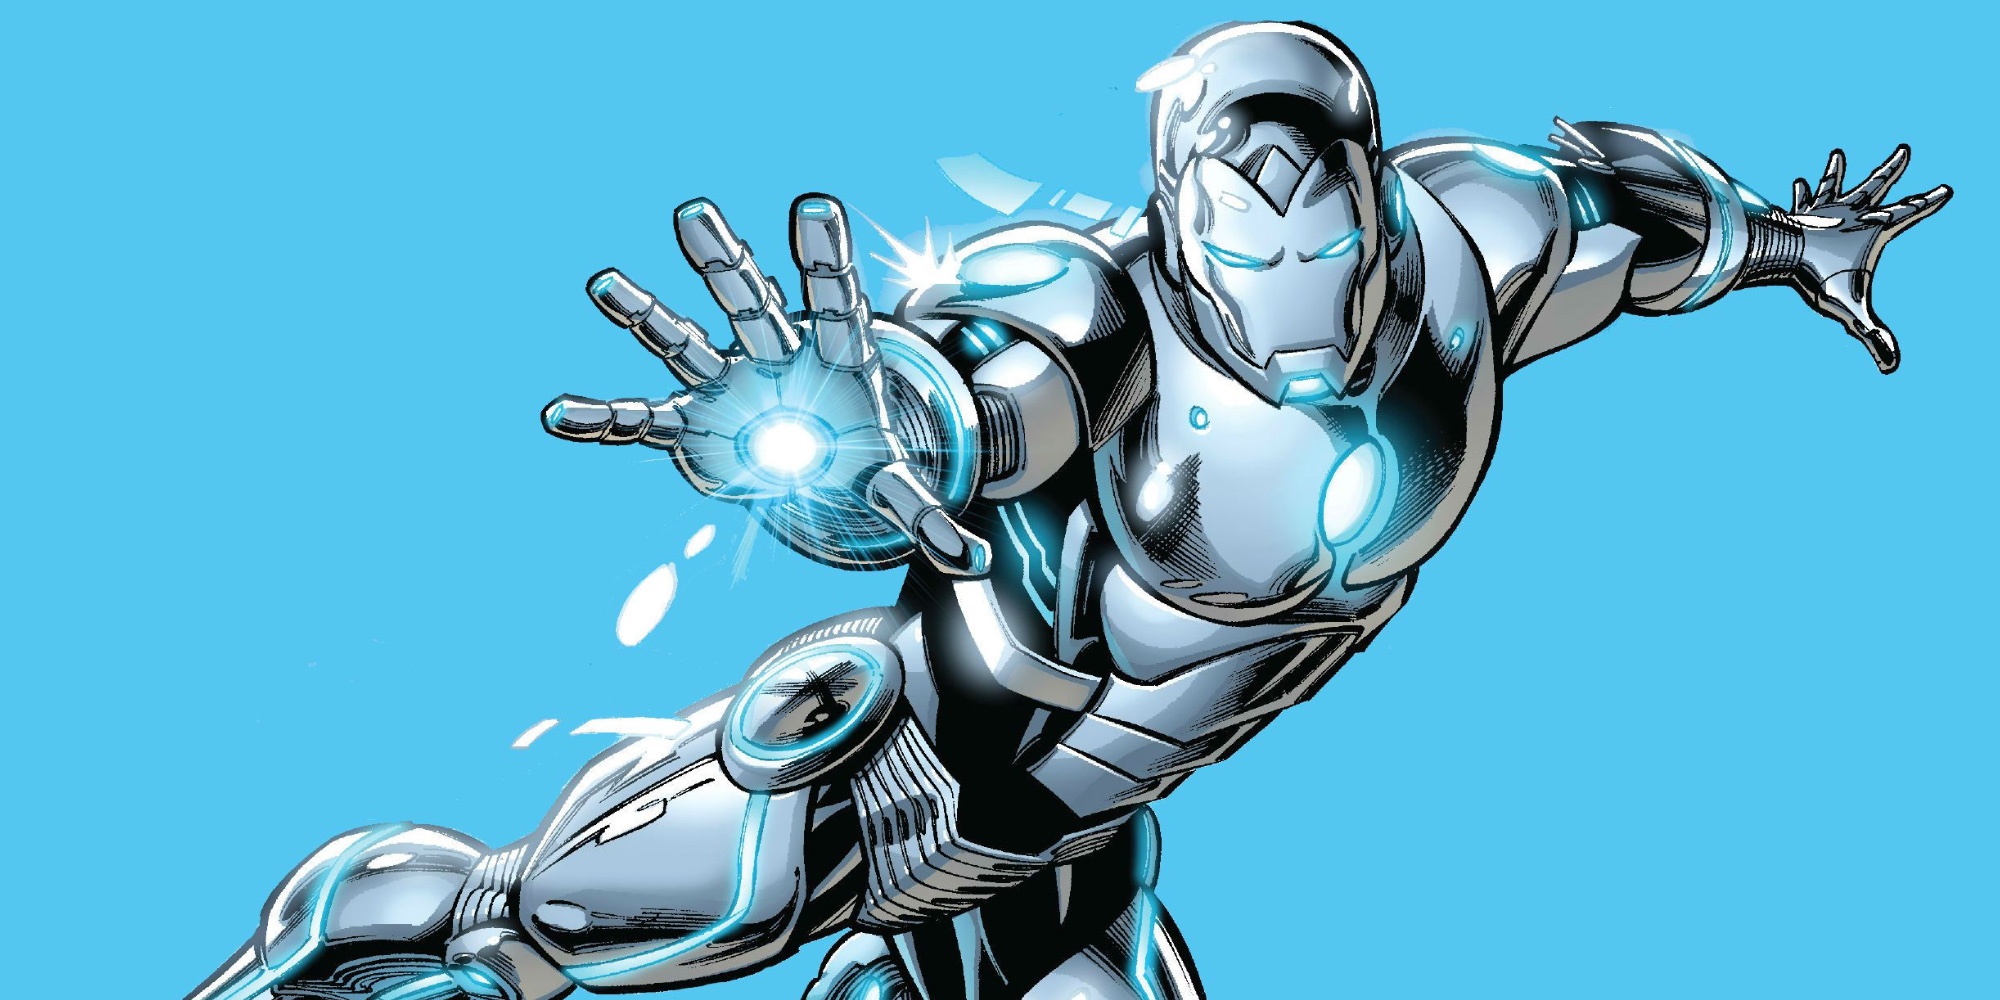 Save 67% on Superior Iron Man, Spider-Gwen, and other Marvel reads from $1.